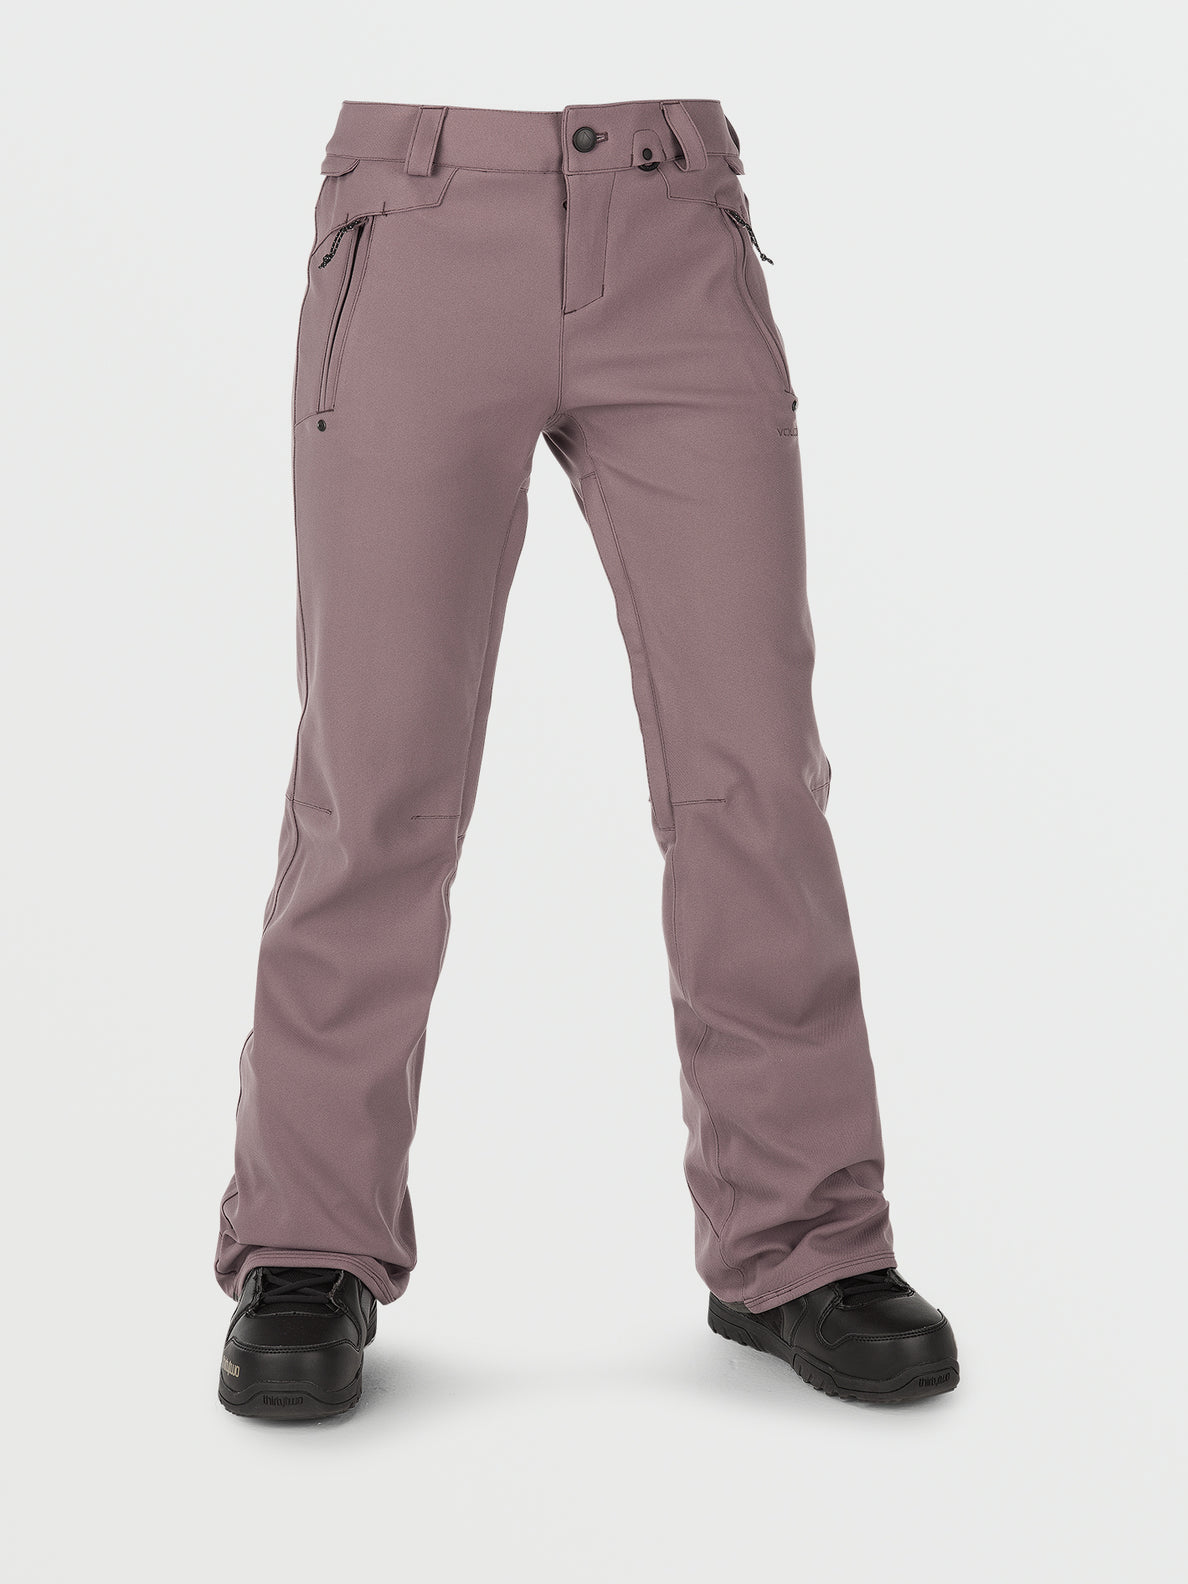 Womens Species Stretch Pants - Rosewood (H1352303_ROS) [5]